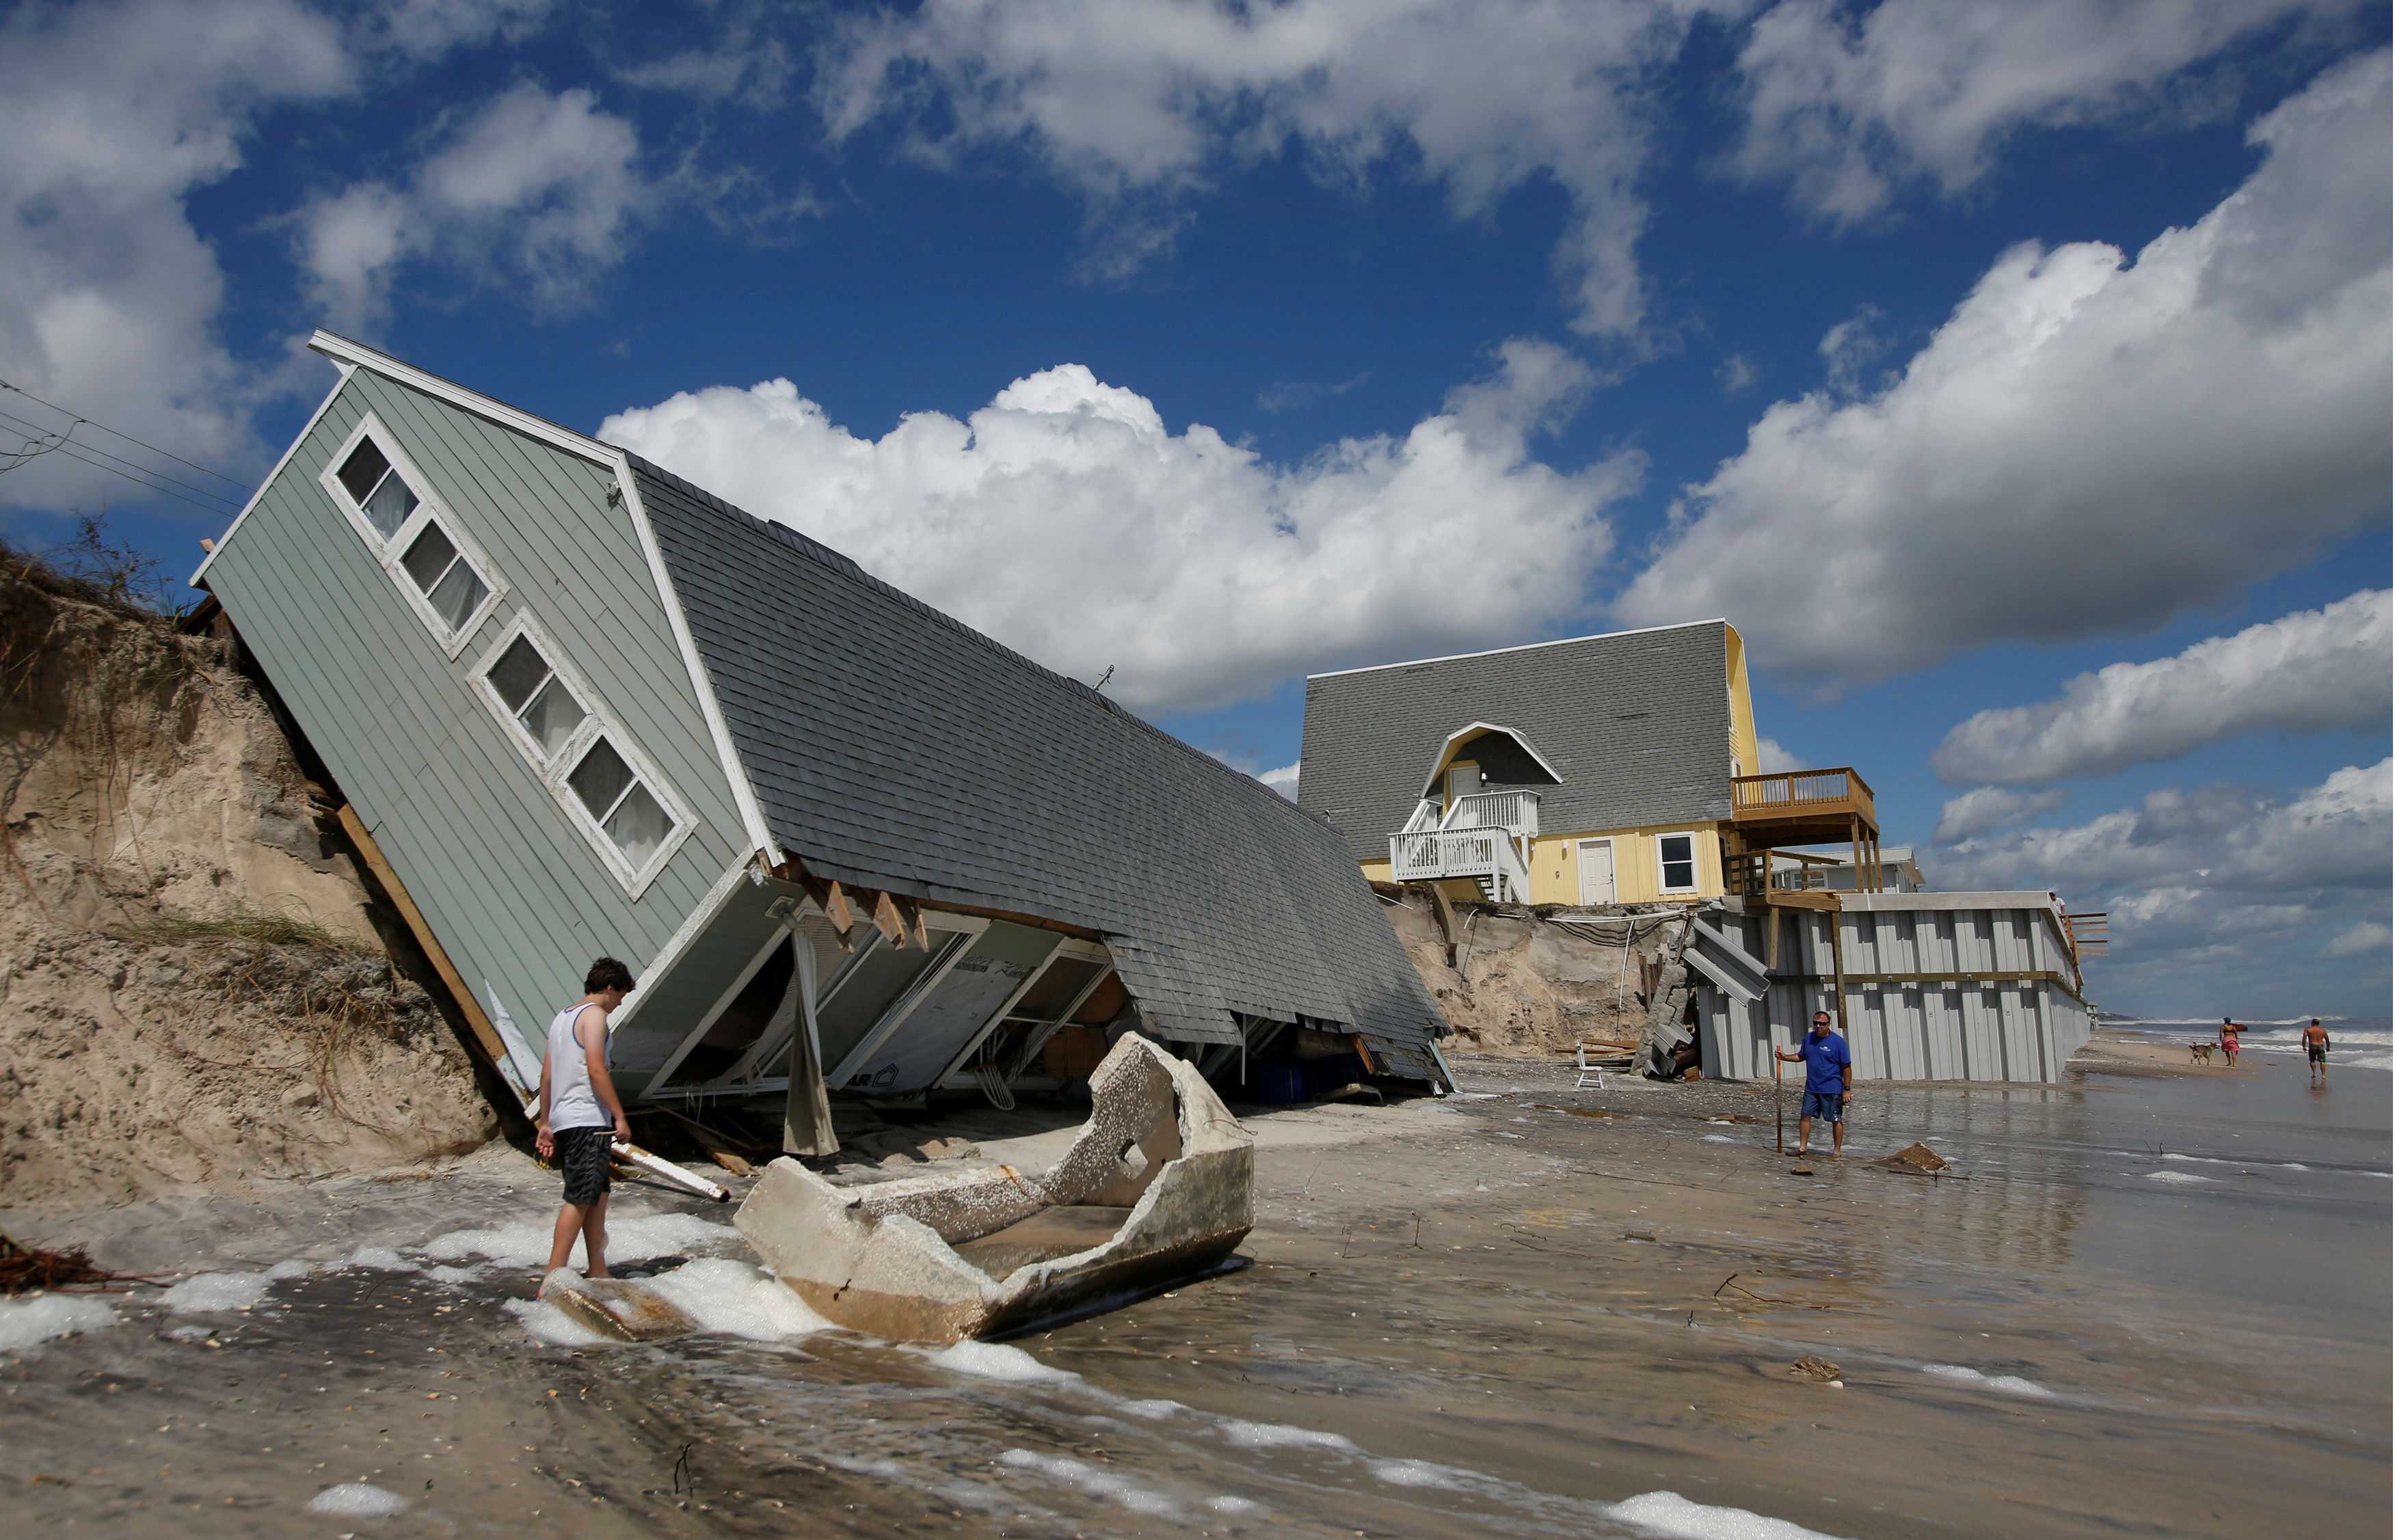 US bishops pray for 'safety, care' of all hit hard by two massive hurricanes